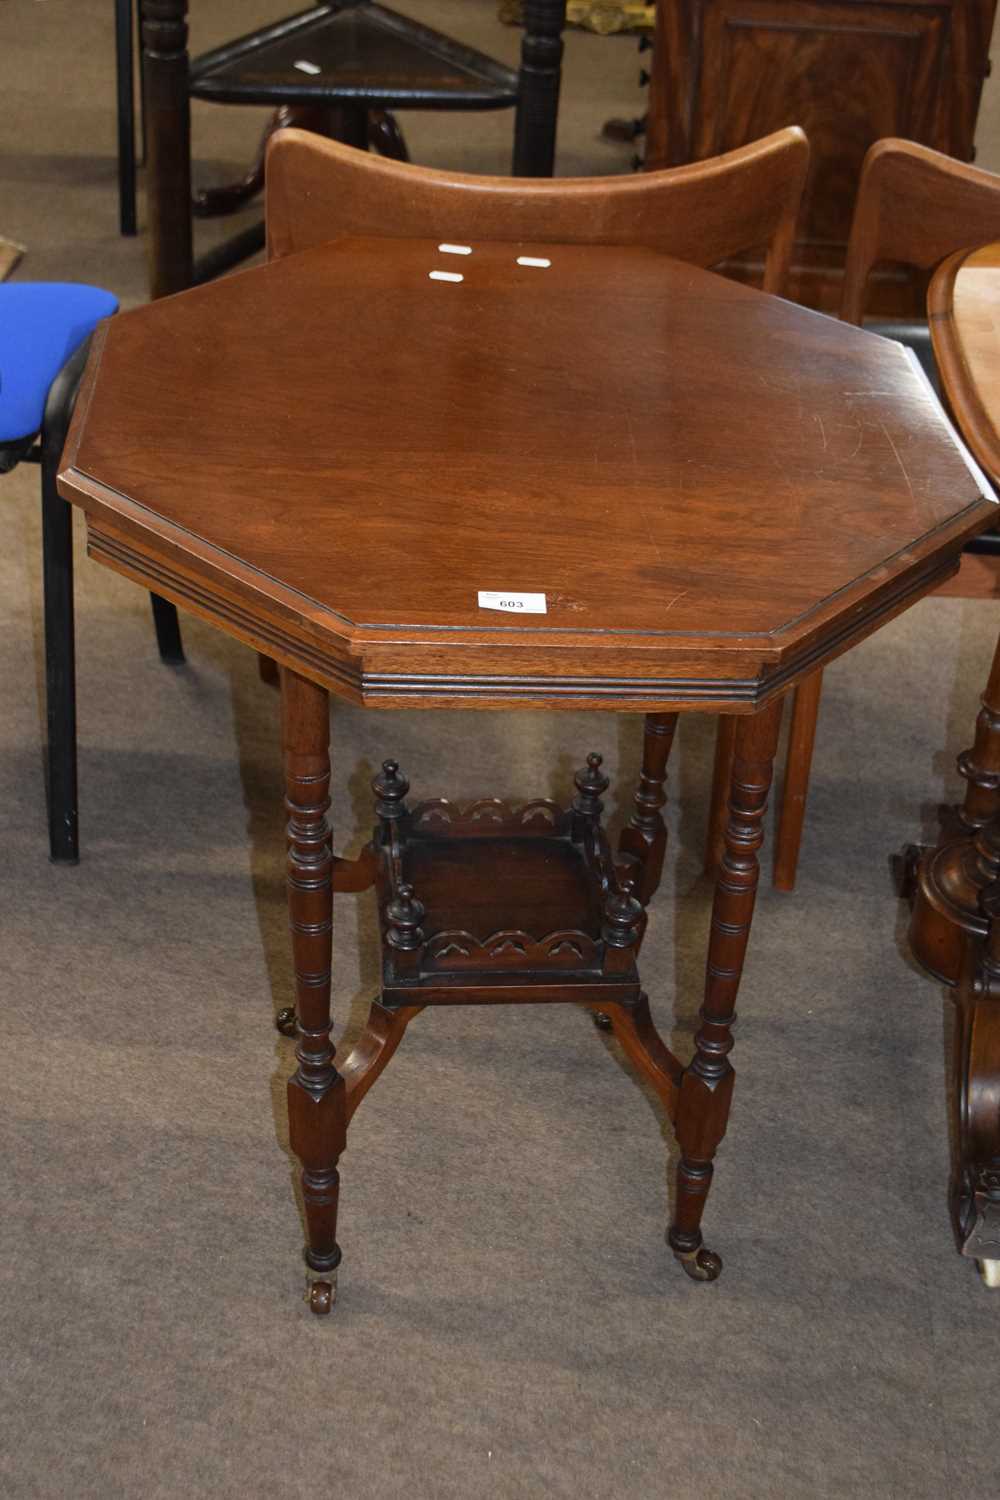 Late 19th Century mahogany octagonal centre table raised on turned legs with base shelf and casters, - Image 3 of 3